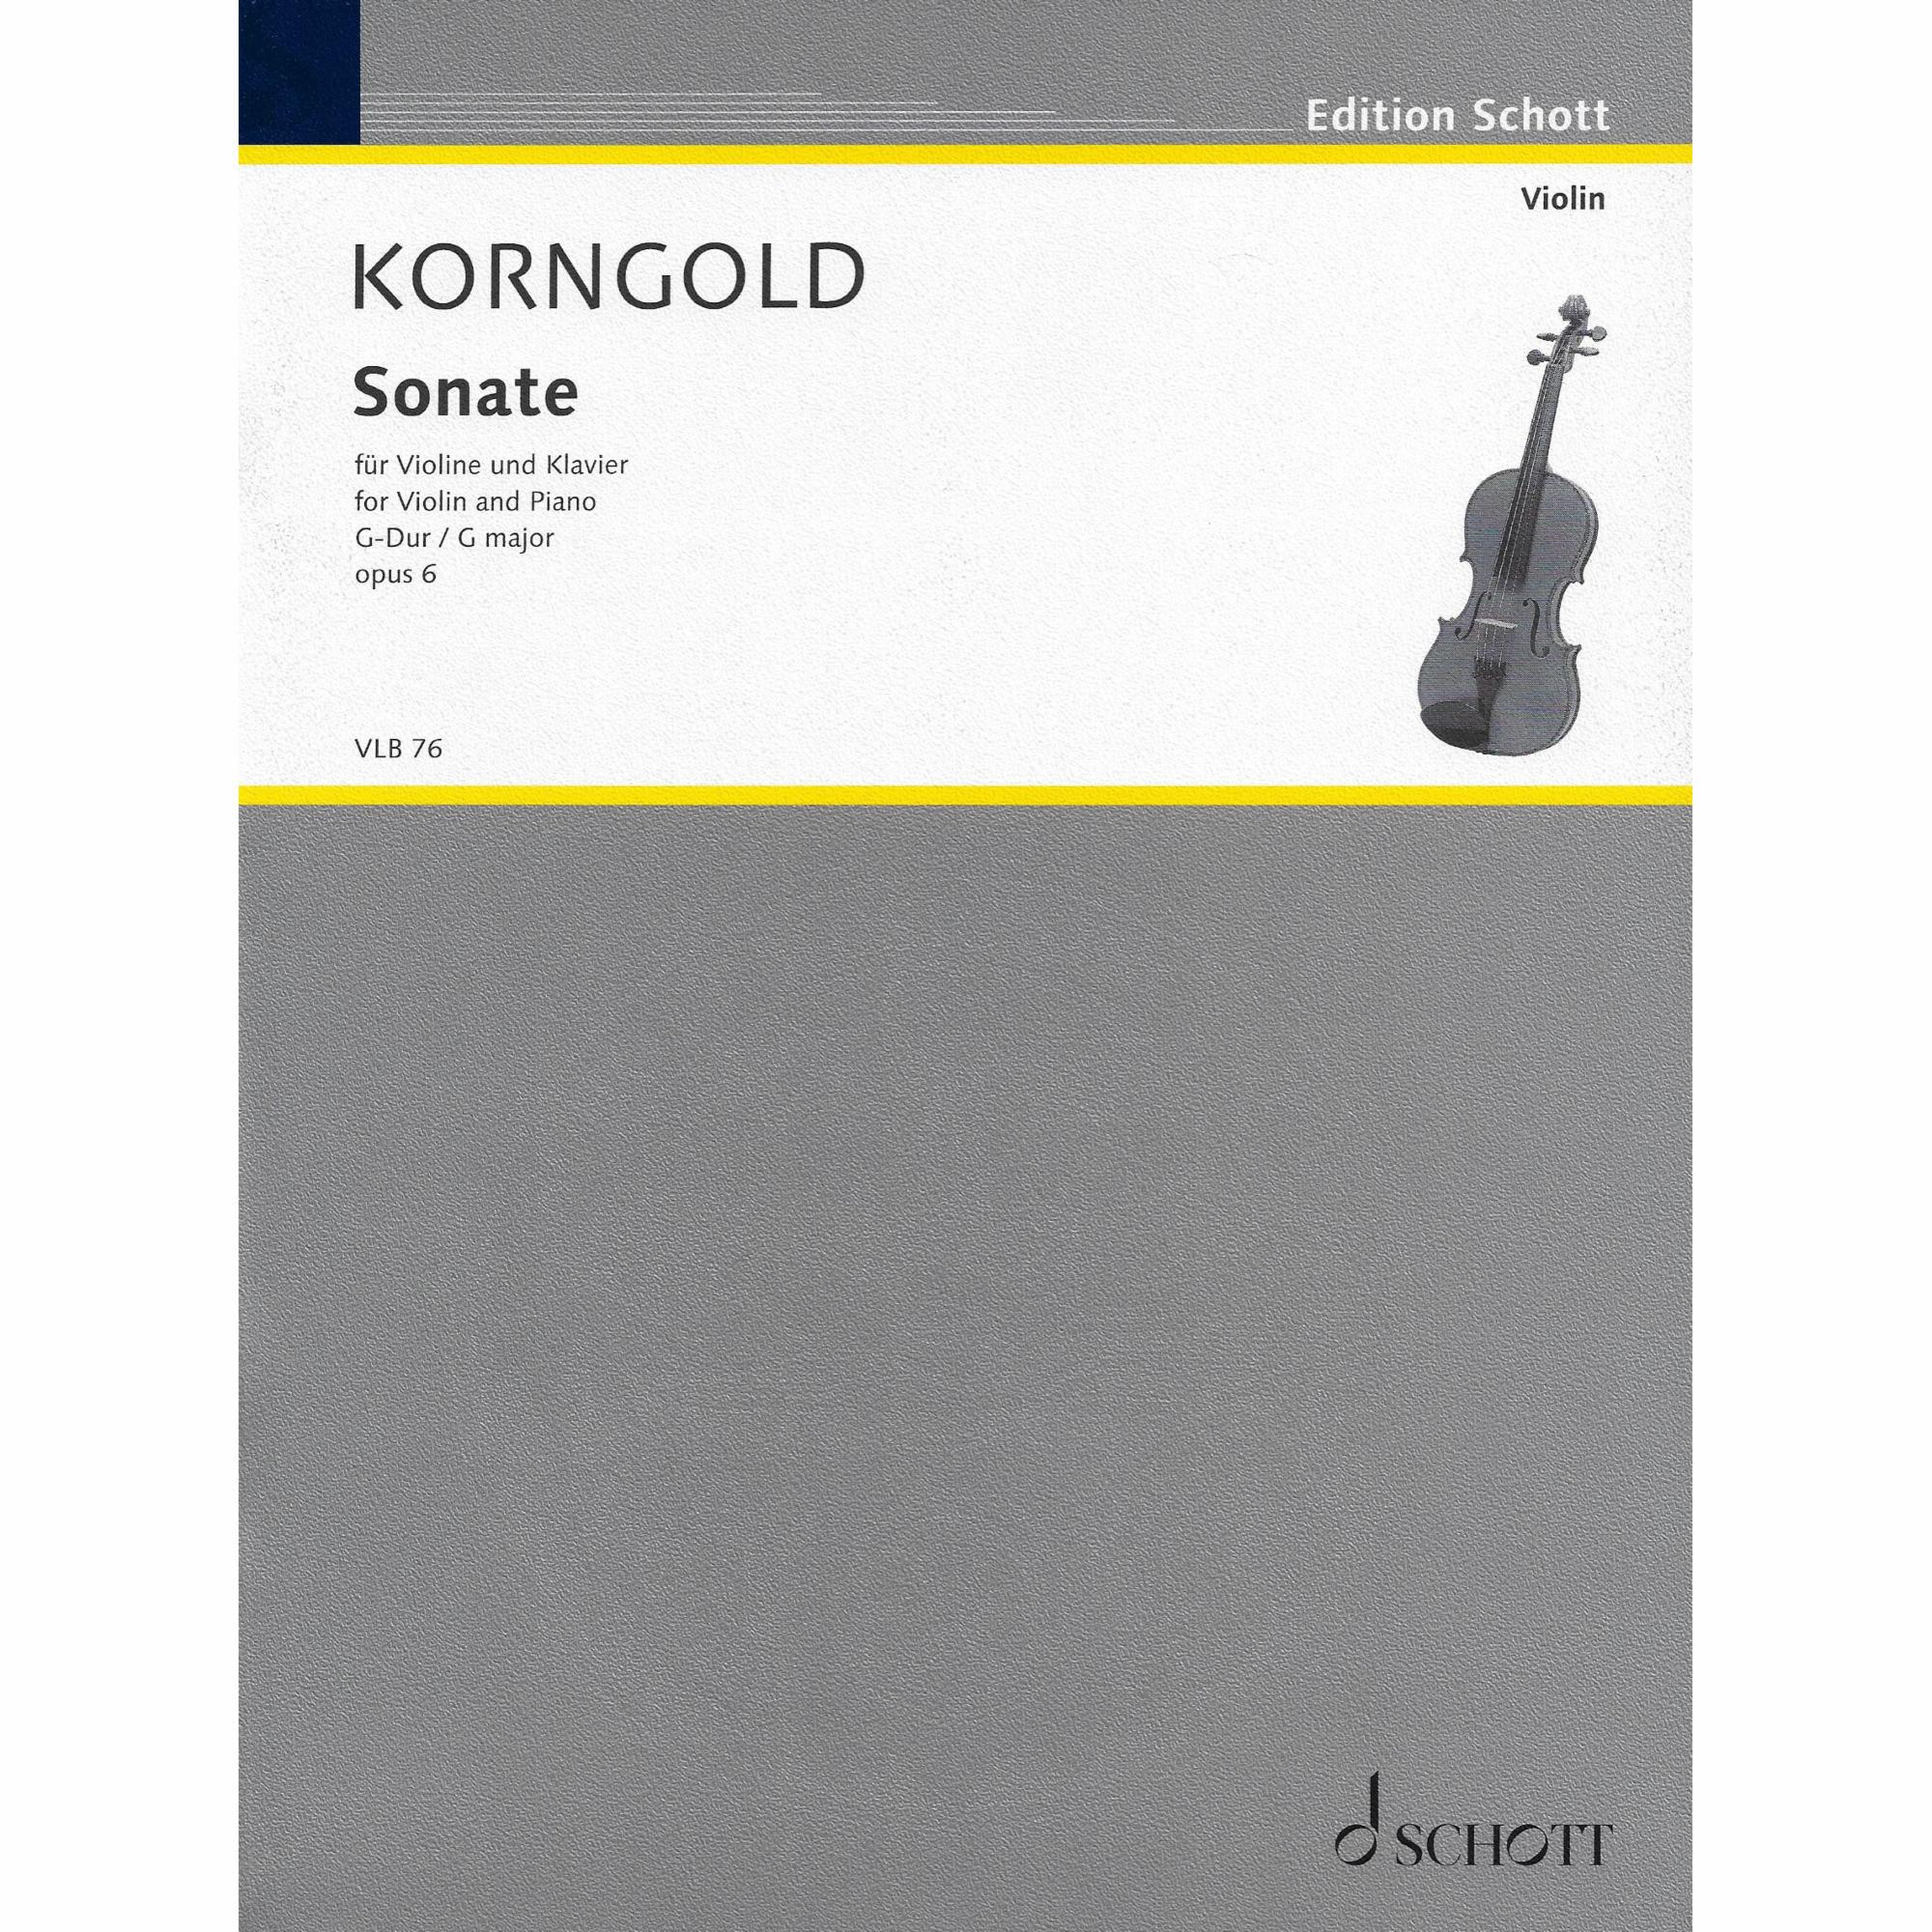 Korngold -- Sonata in G Major, Op. 6 for Violin and Piano